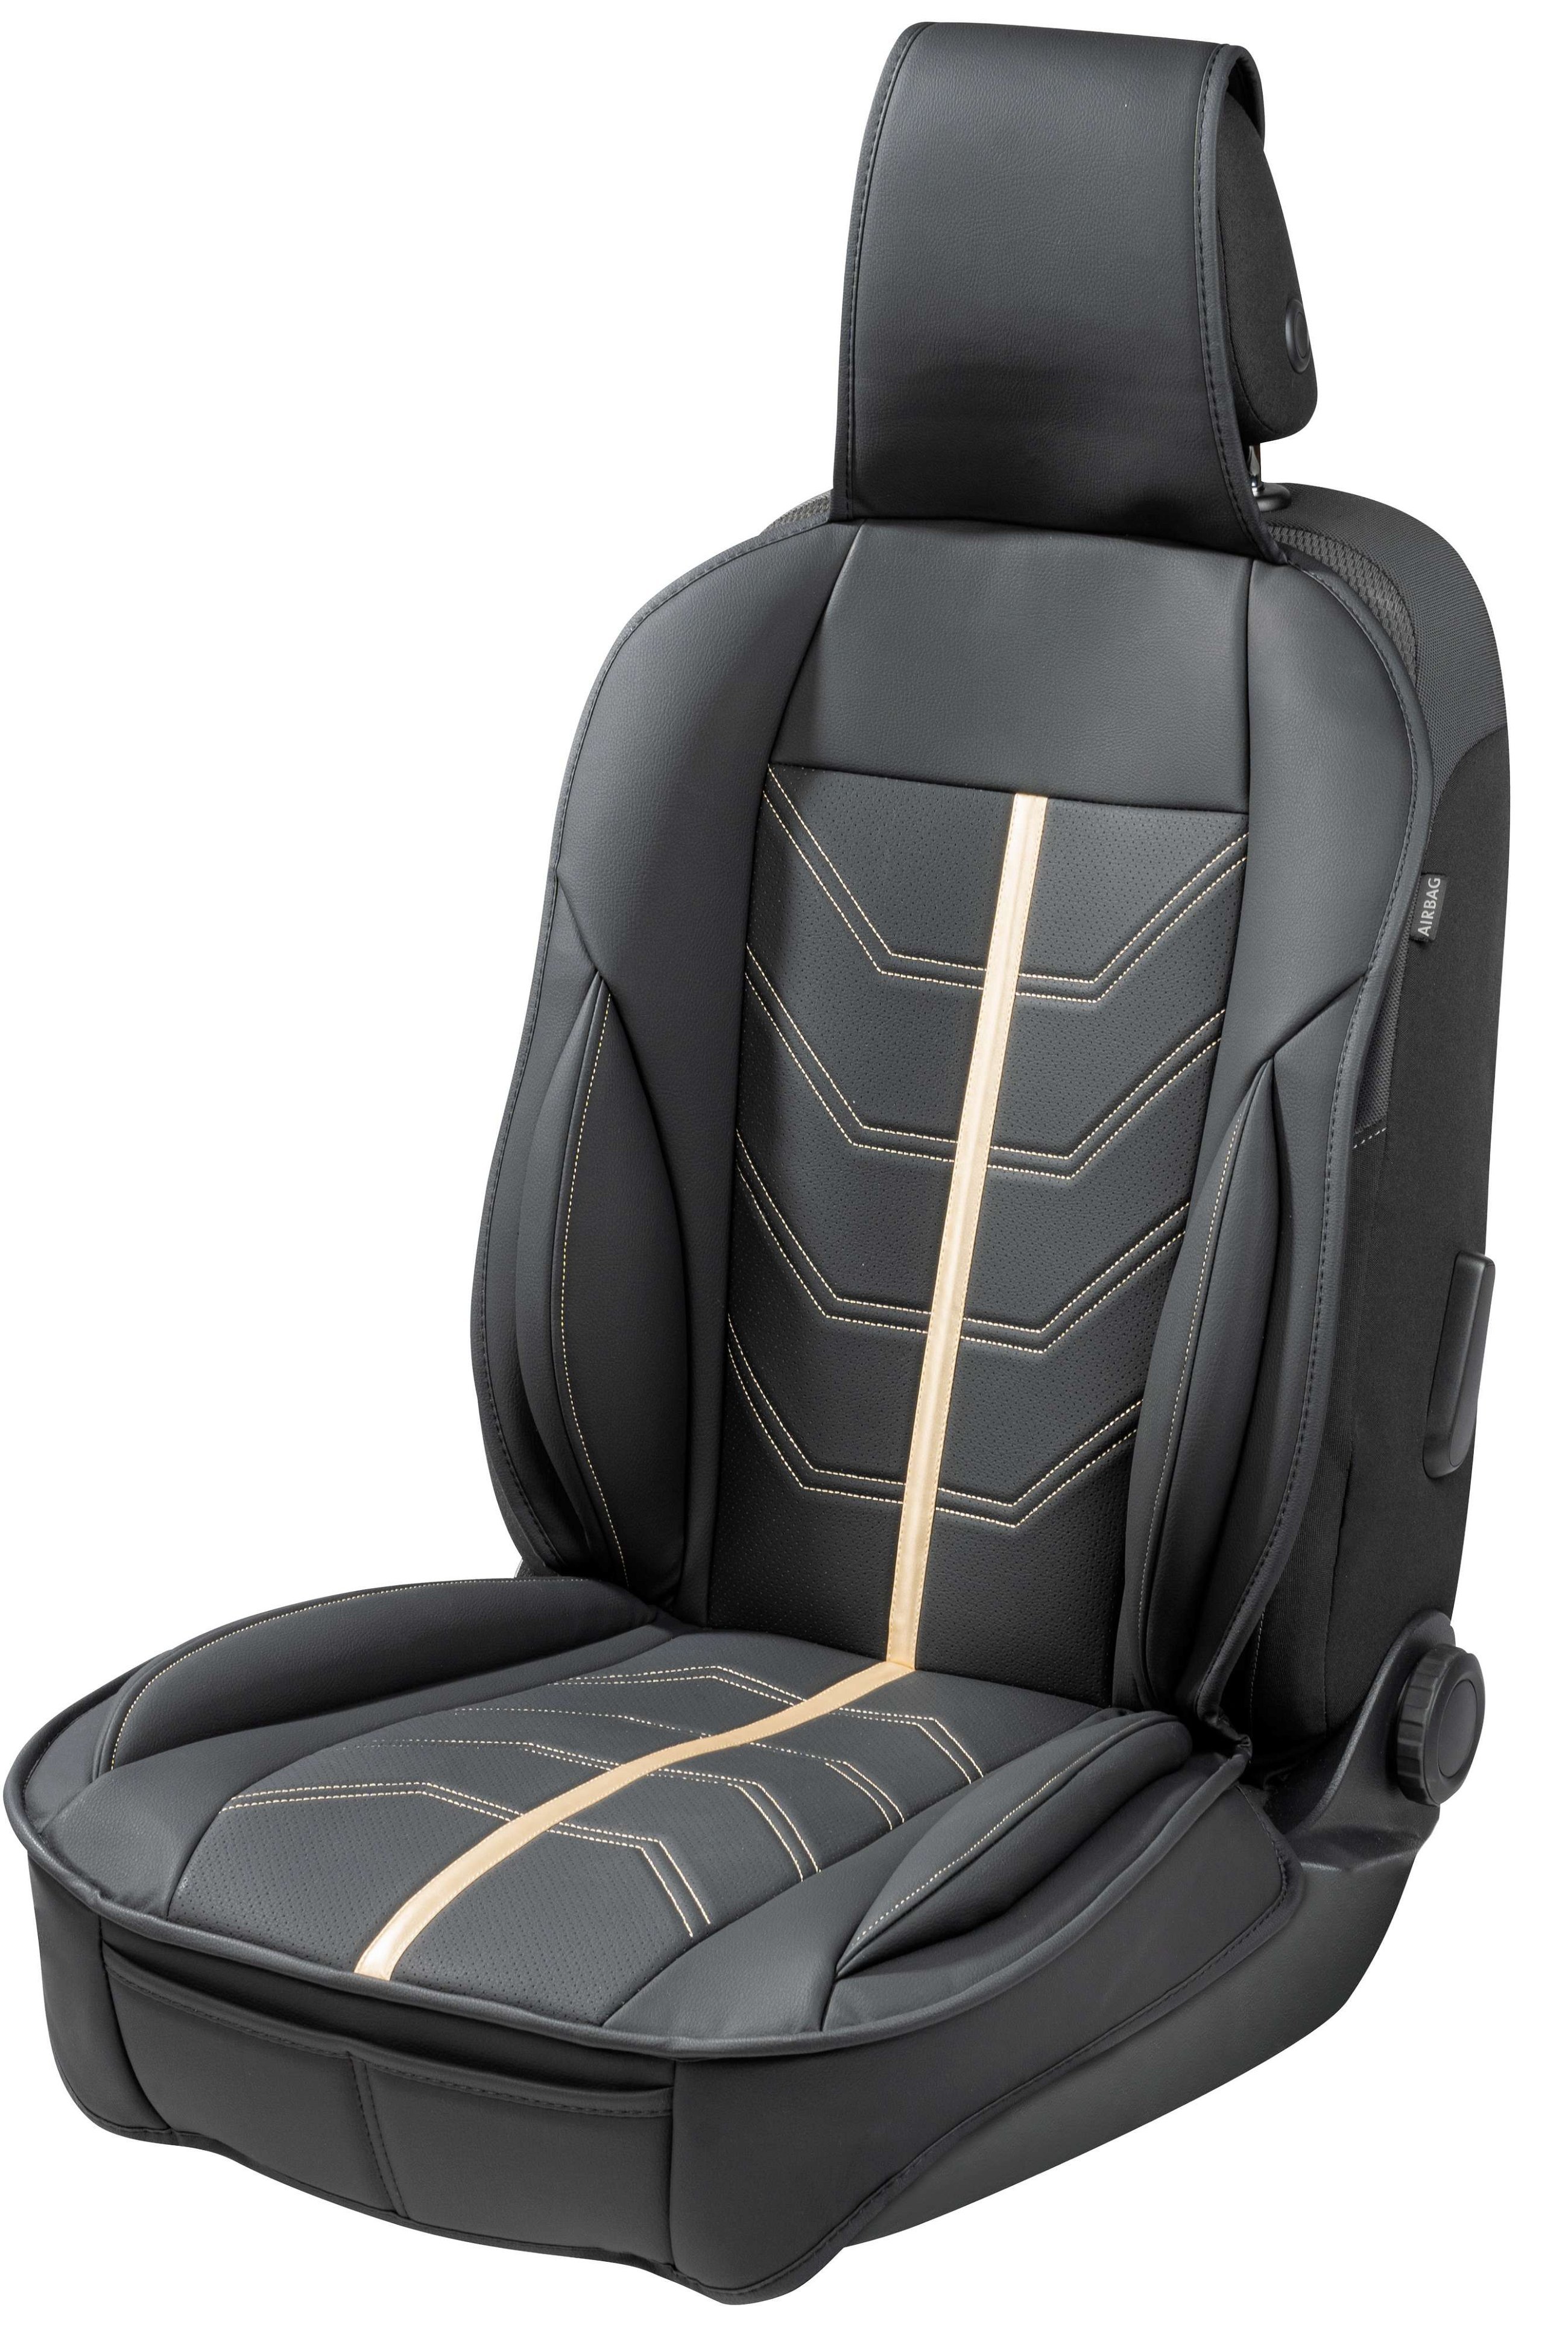 Car Seat cover Kimi, seat protector for cars in racing look black/gold